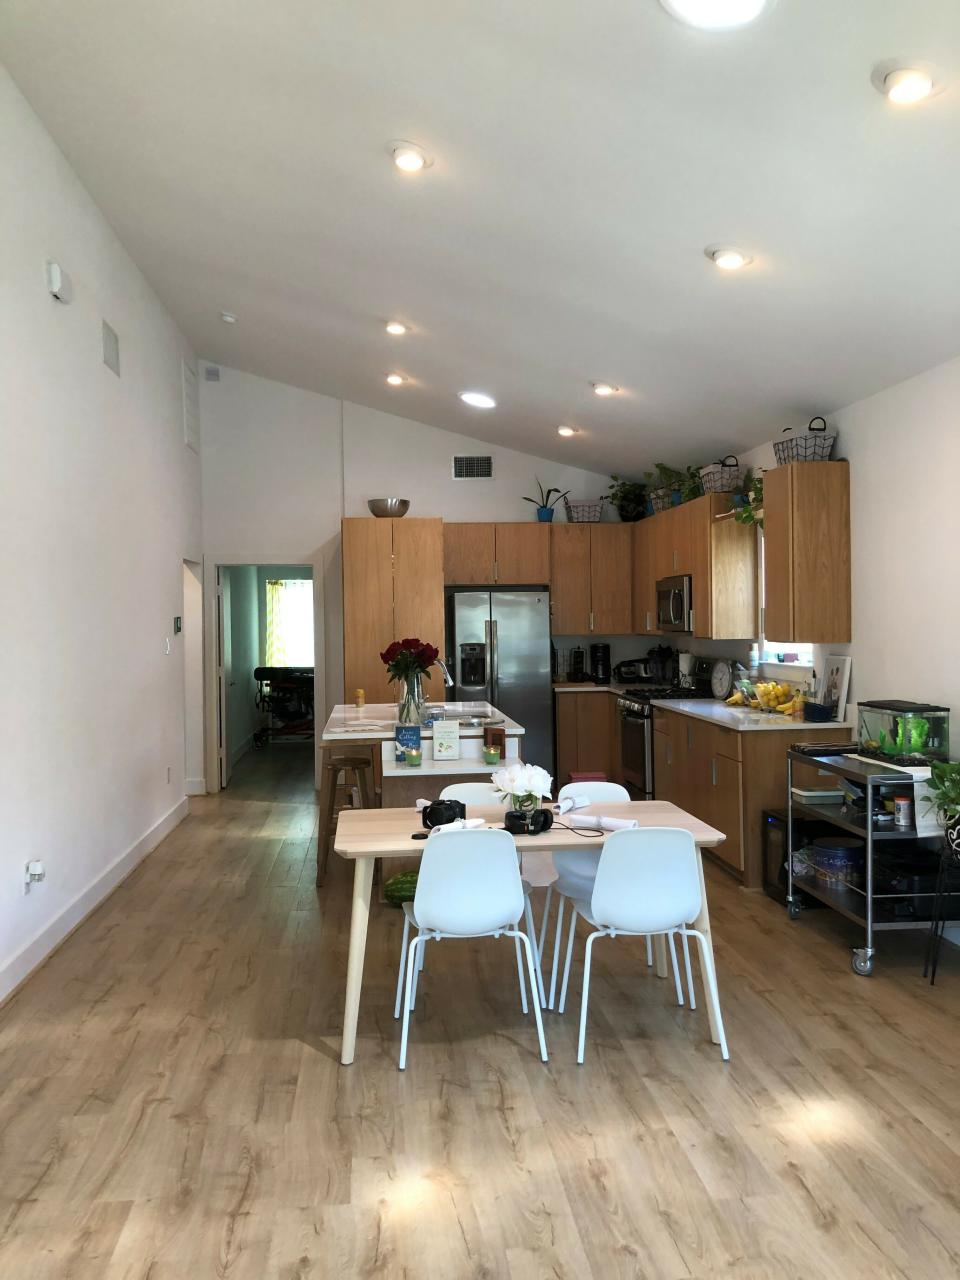 In this Wednesday, June 12, 2019 photo, shows the kitchen and dining area of Scenacia Jones' home in Houston, constructed as part of an innovative program that builds houses after natural disasters. The housing program, known as Rapido, Spanish for fast, uses pre-built materials to construct a core structure the size of mobile home and lets families live in this core while the rest of the house is completed. The first such home built in Houston debuted this week. Groups behind the program are hoping a bill signed this week by Texas Gov. Greg Abbott related to disaster planning will boost their efforts. (AP Photo/Juan Lozano)